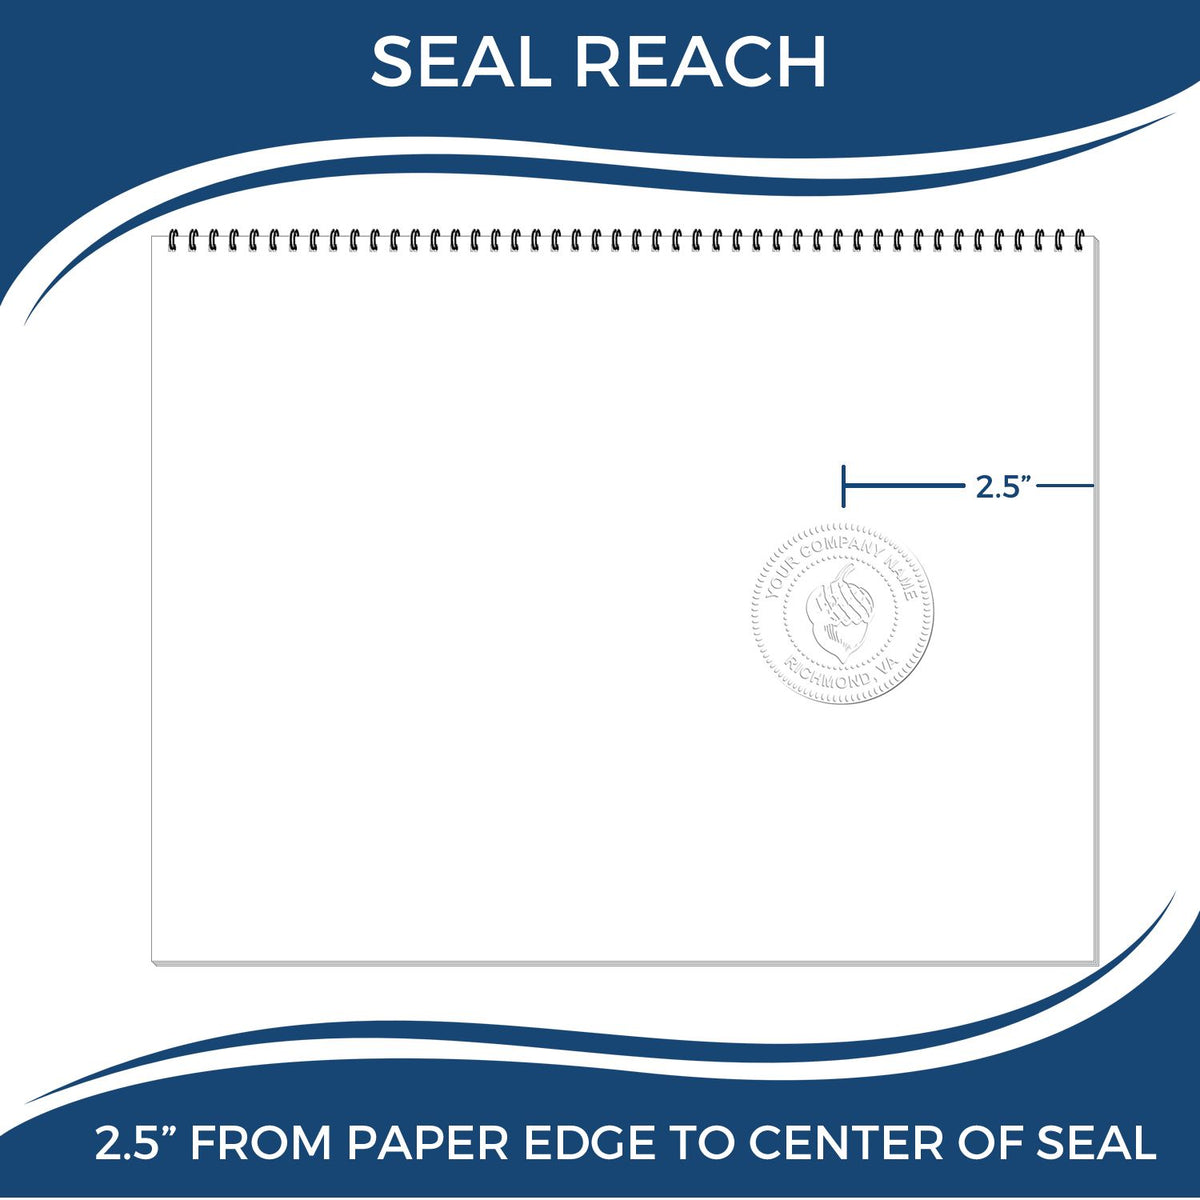 An infographic showing the seal reach which is represented by a ruler and a miniature seal image of the Long Reach Georgia Land Surveyor Seal